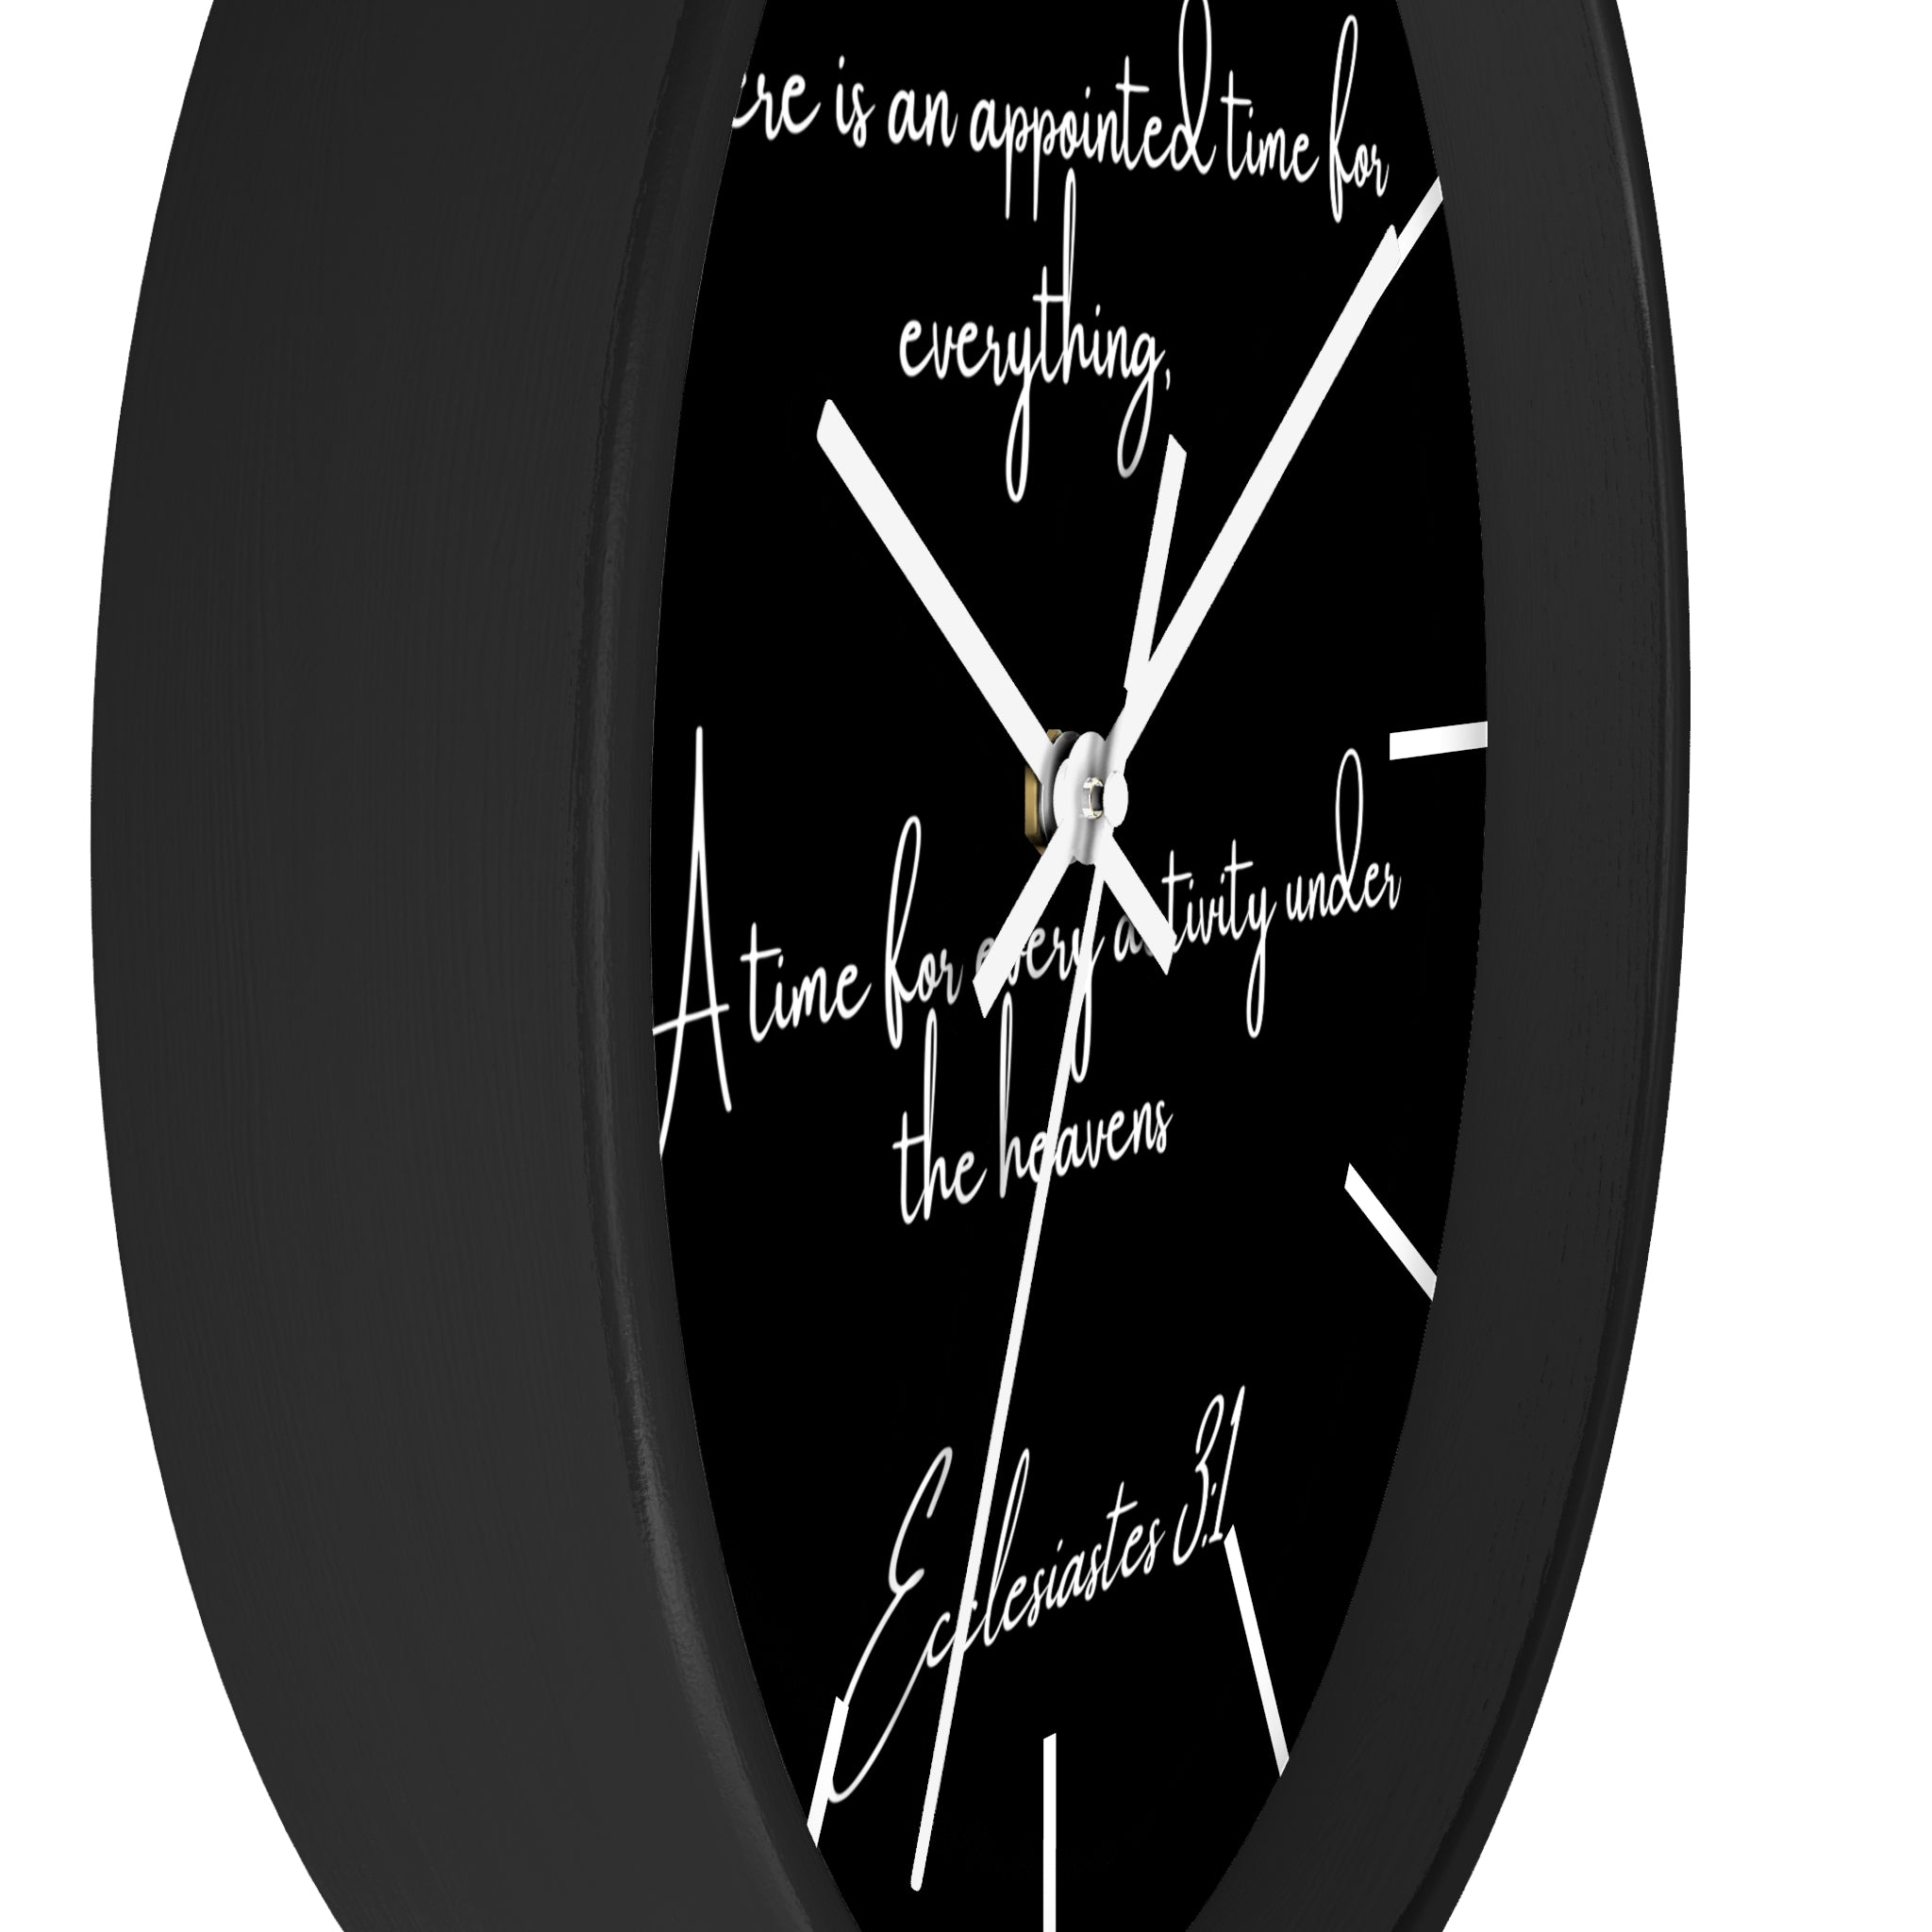 A Time For Everything - Wall Clock